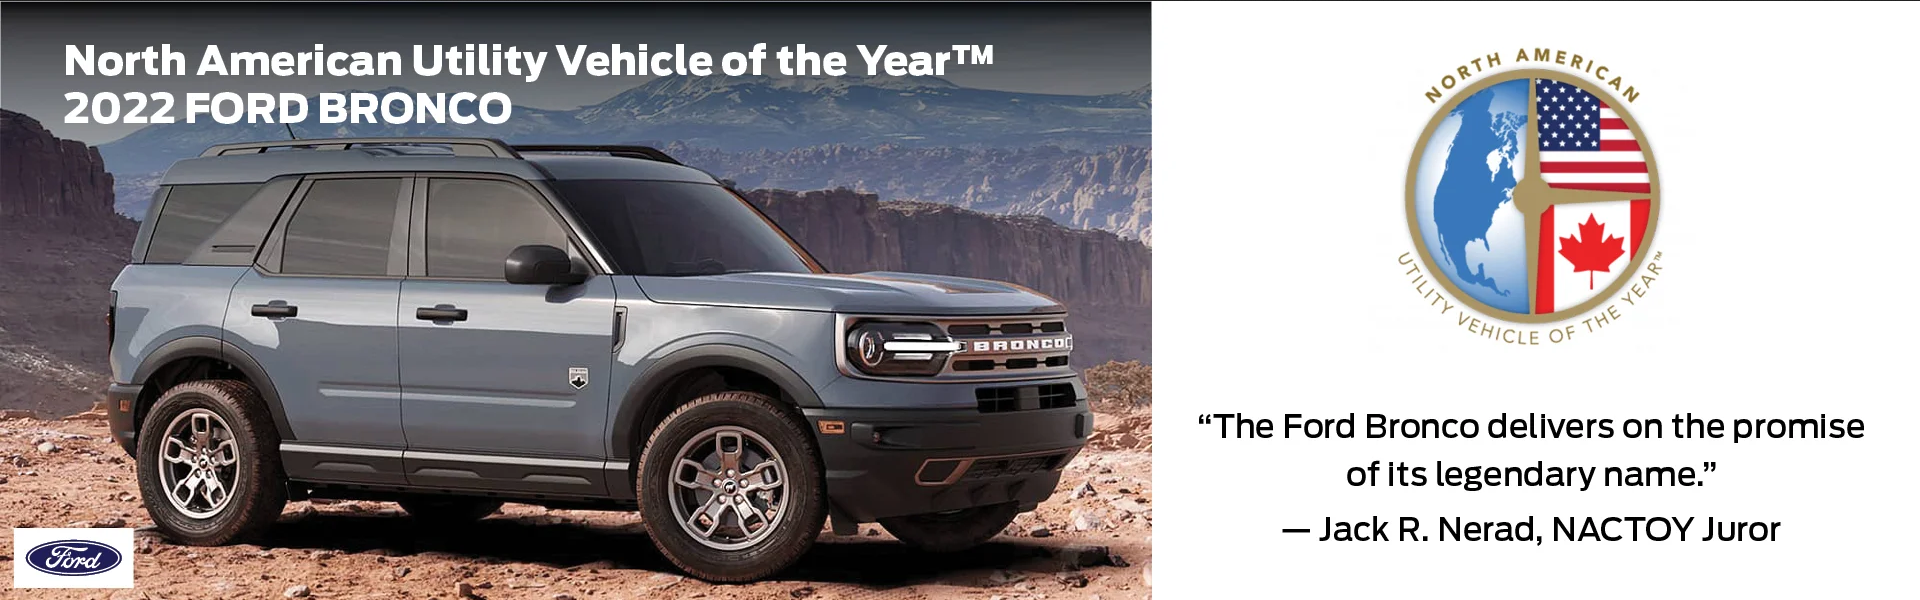 North American utility Vehicle of the year 